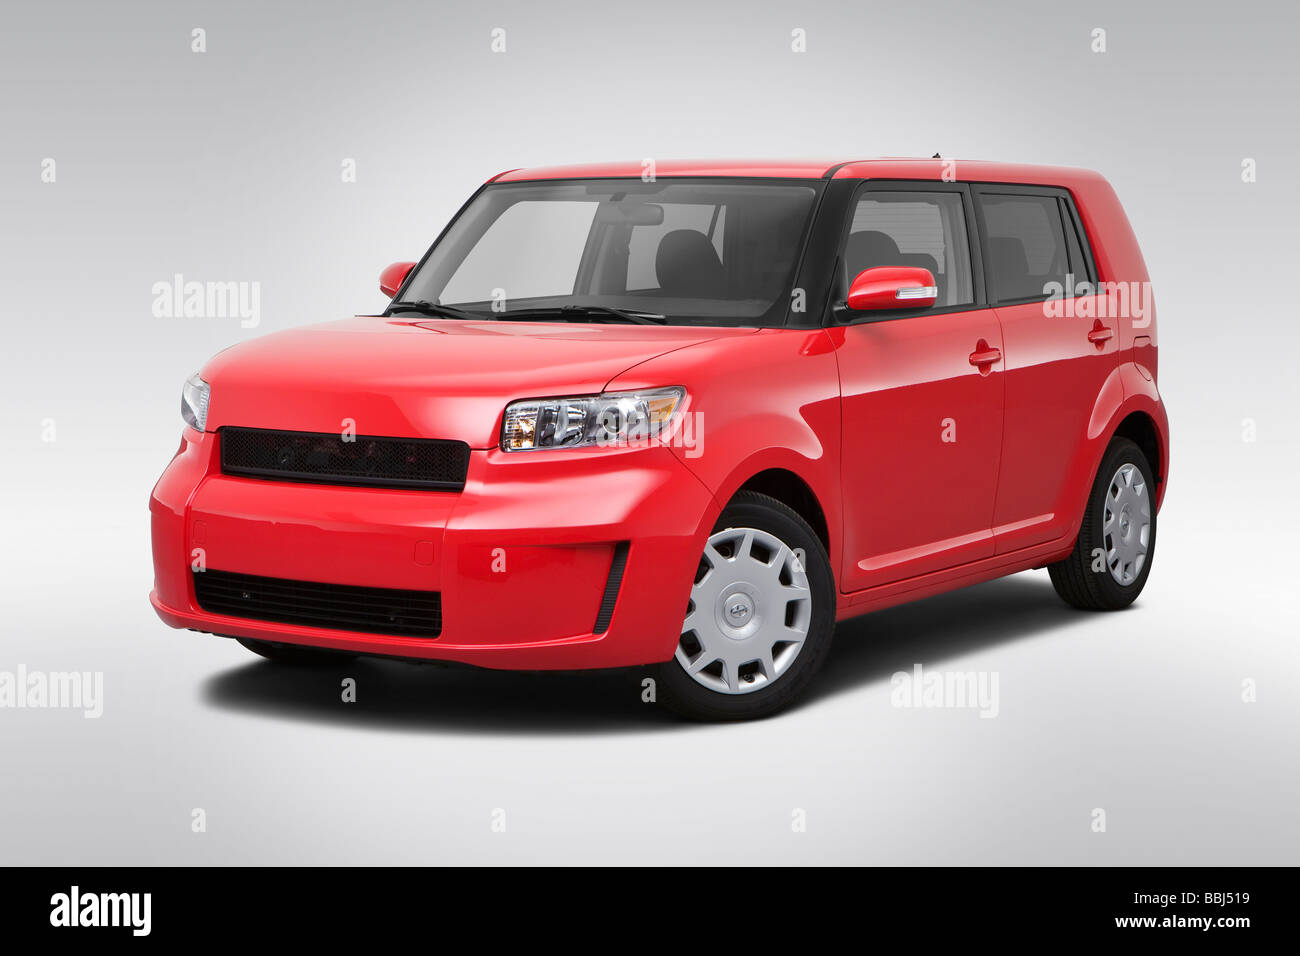 2009 Scion xB Series 6.0 in Red - Front angle view Stock Photo